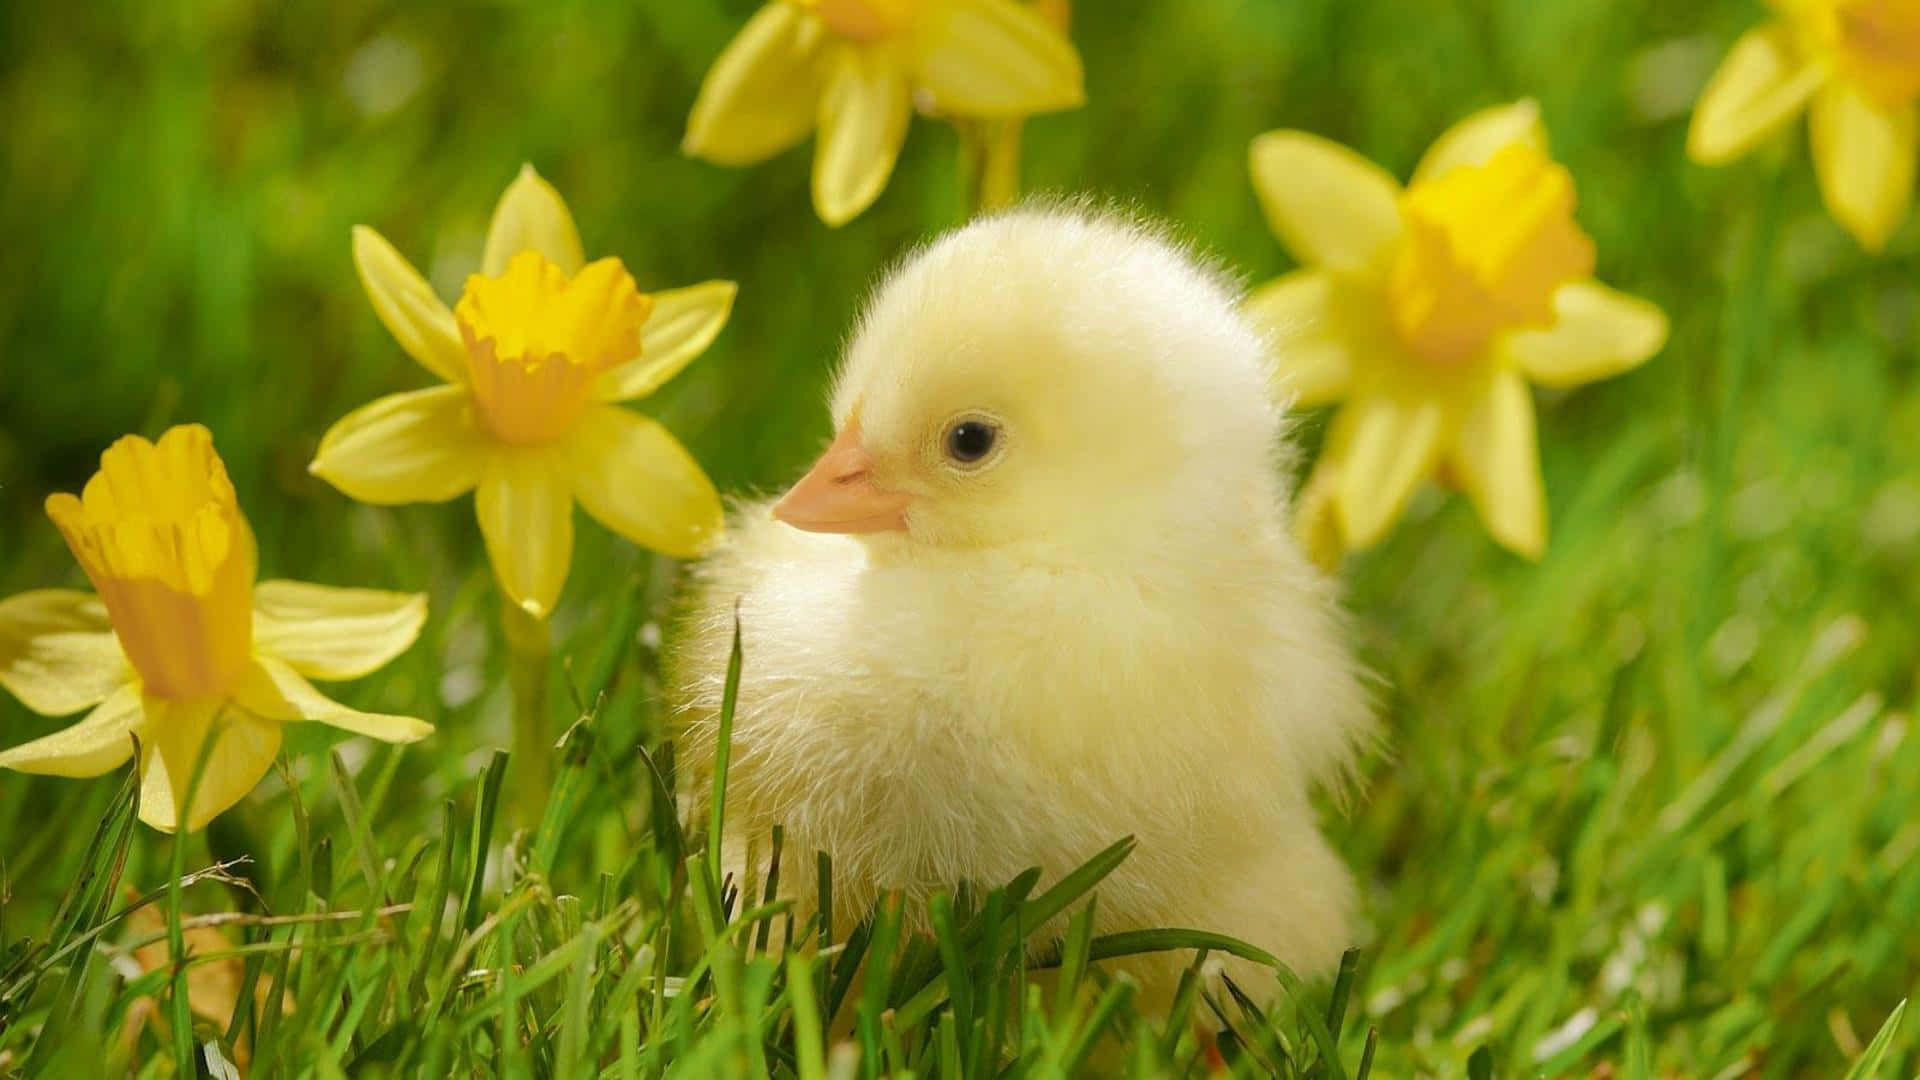 A Small Chick Is Standing In The Grass With Yellow Flowers Wallpaper